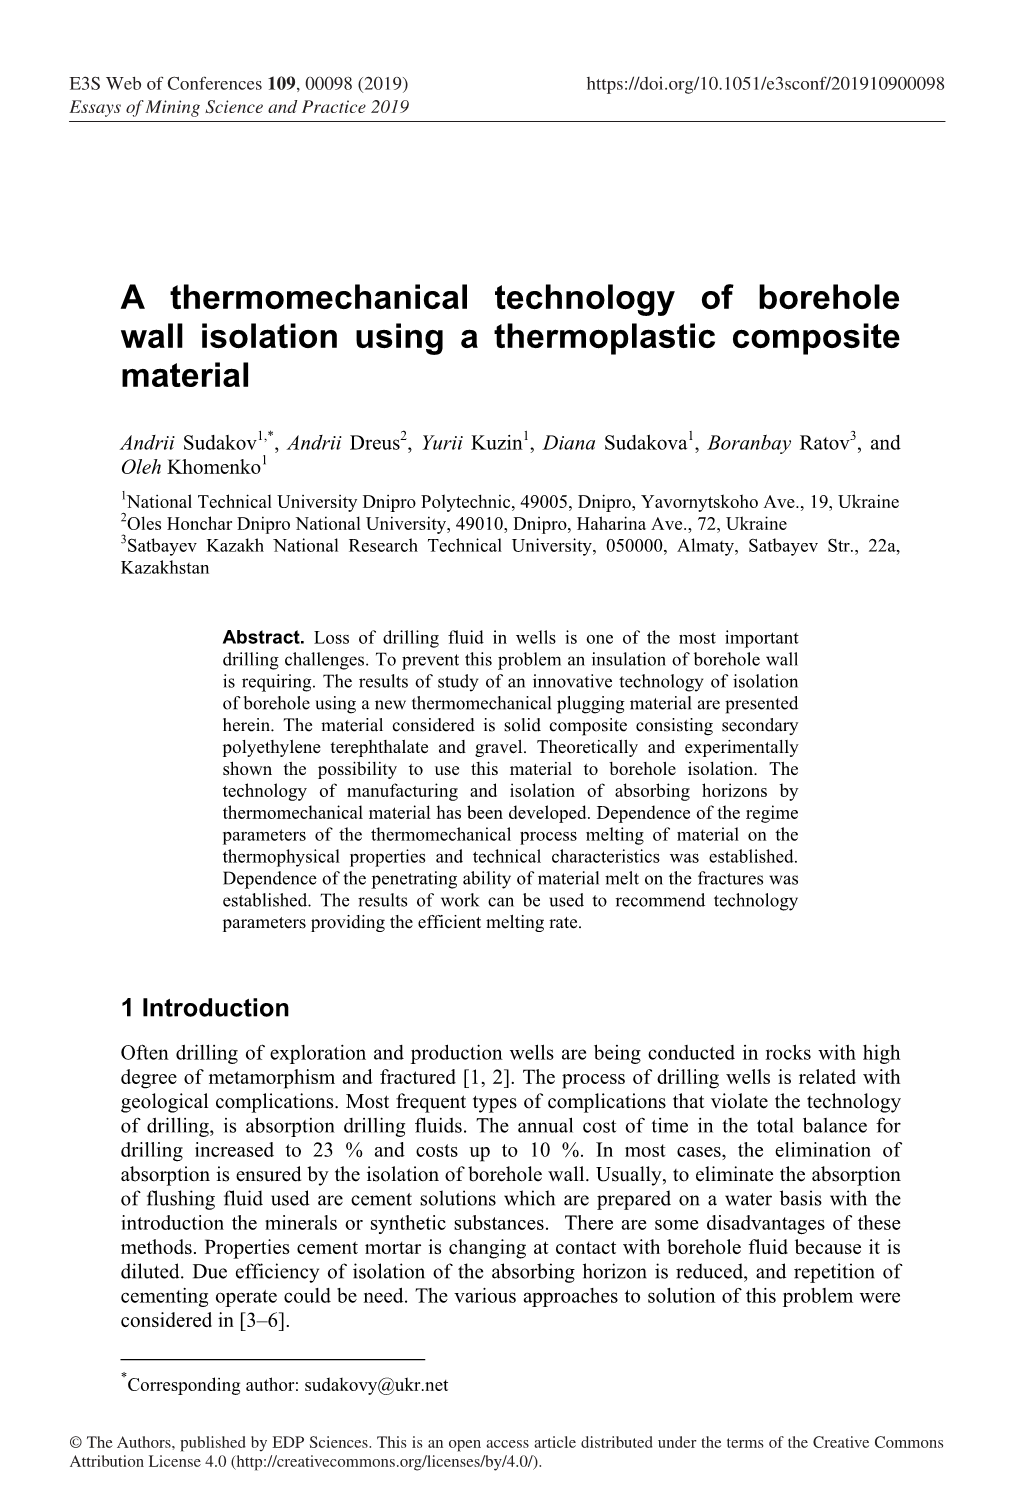 A Thermomechanical Technology of Borehole Wall Isolation Using a Thermoplastic Composite Material